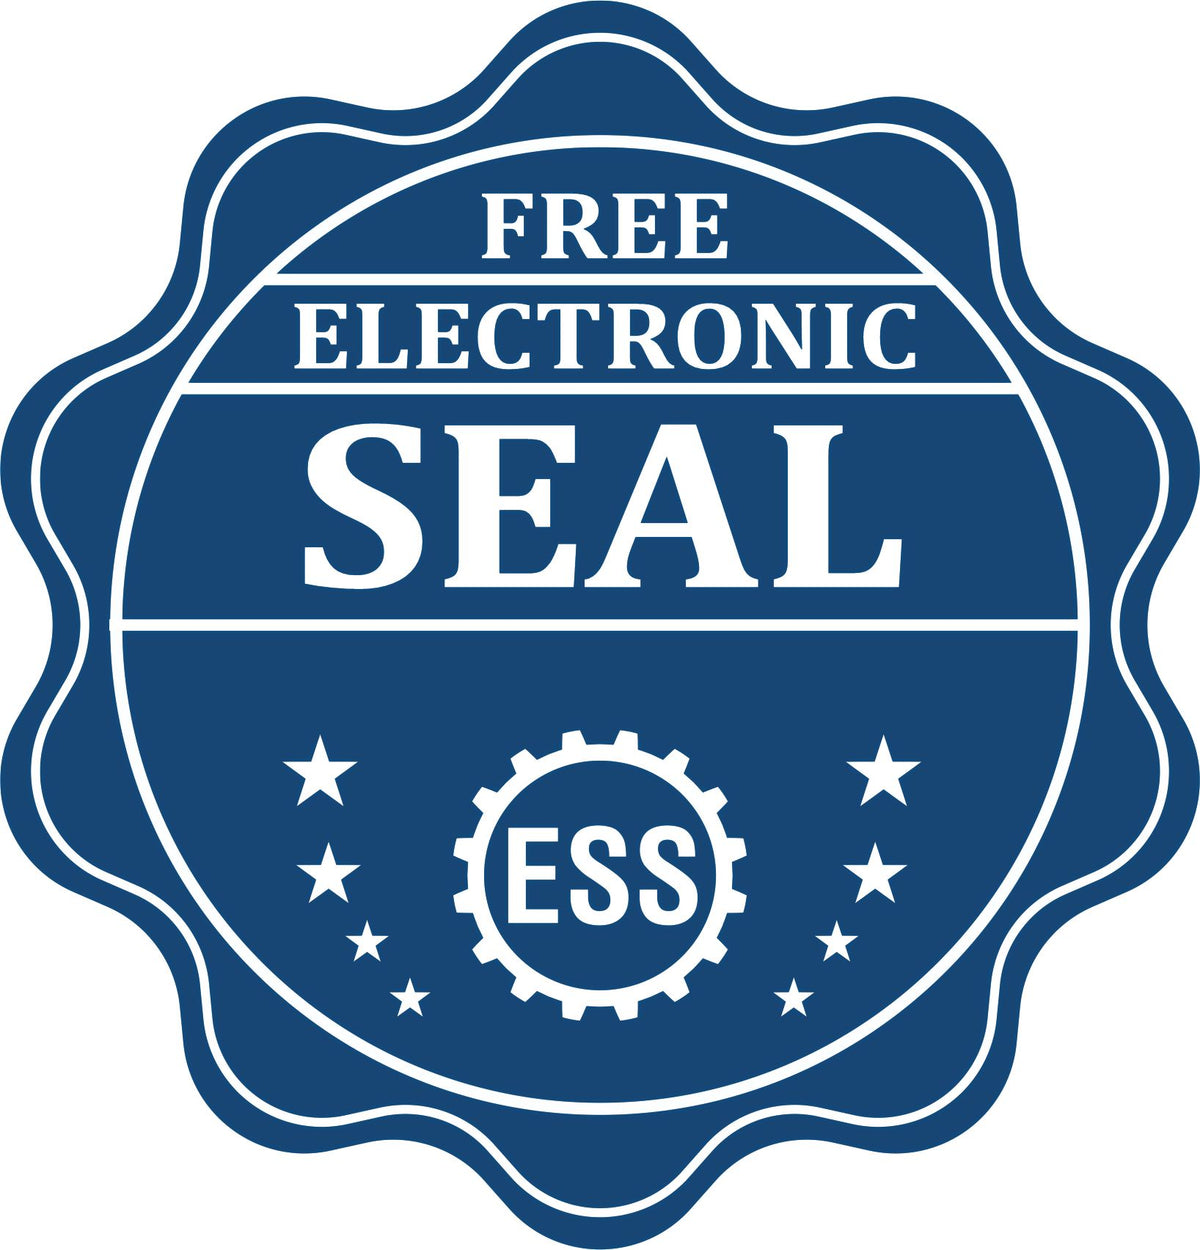 A badge showing a free electronic seal for the Wooden Handle Iowa State Seal Notary Public Stamp with stars and the ESS gear on the emblem.